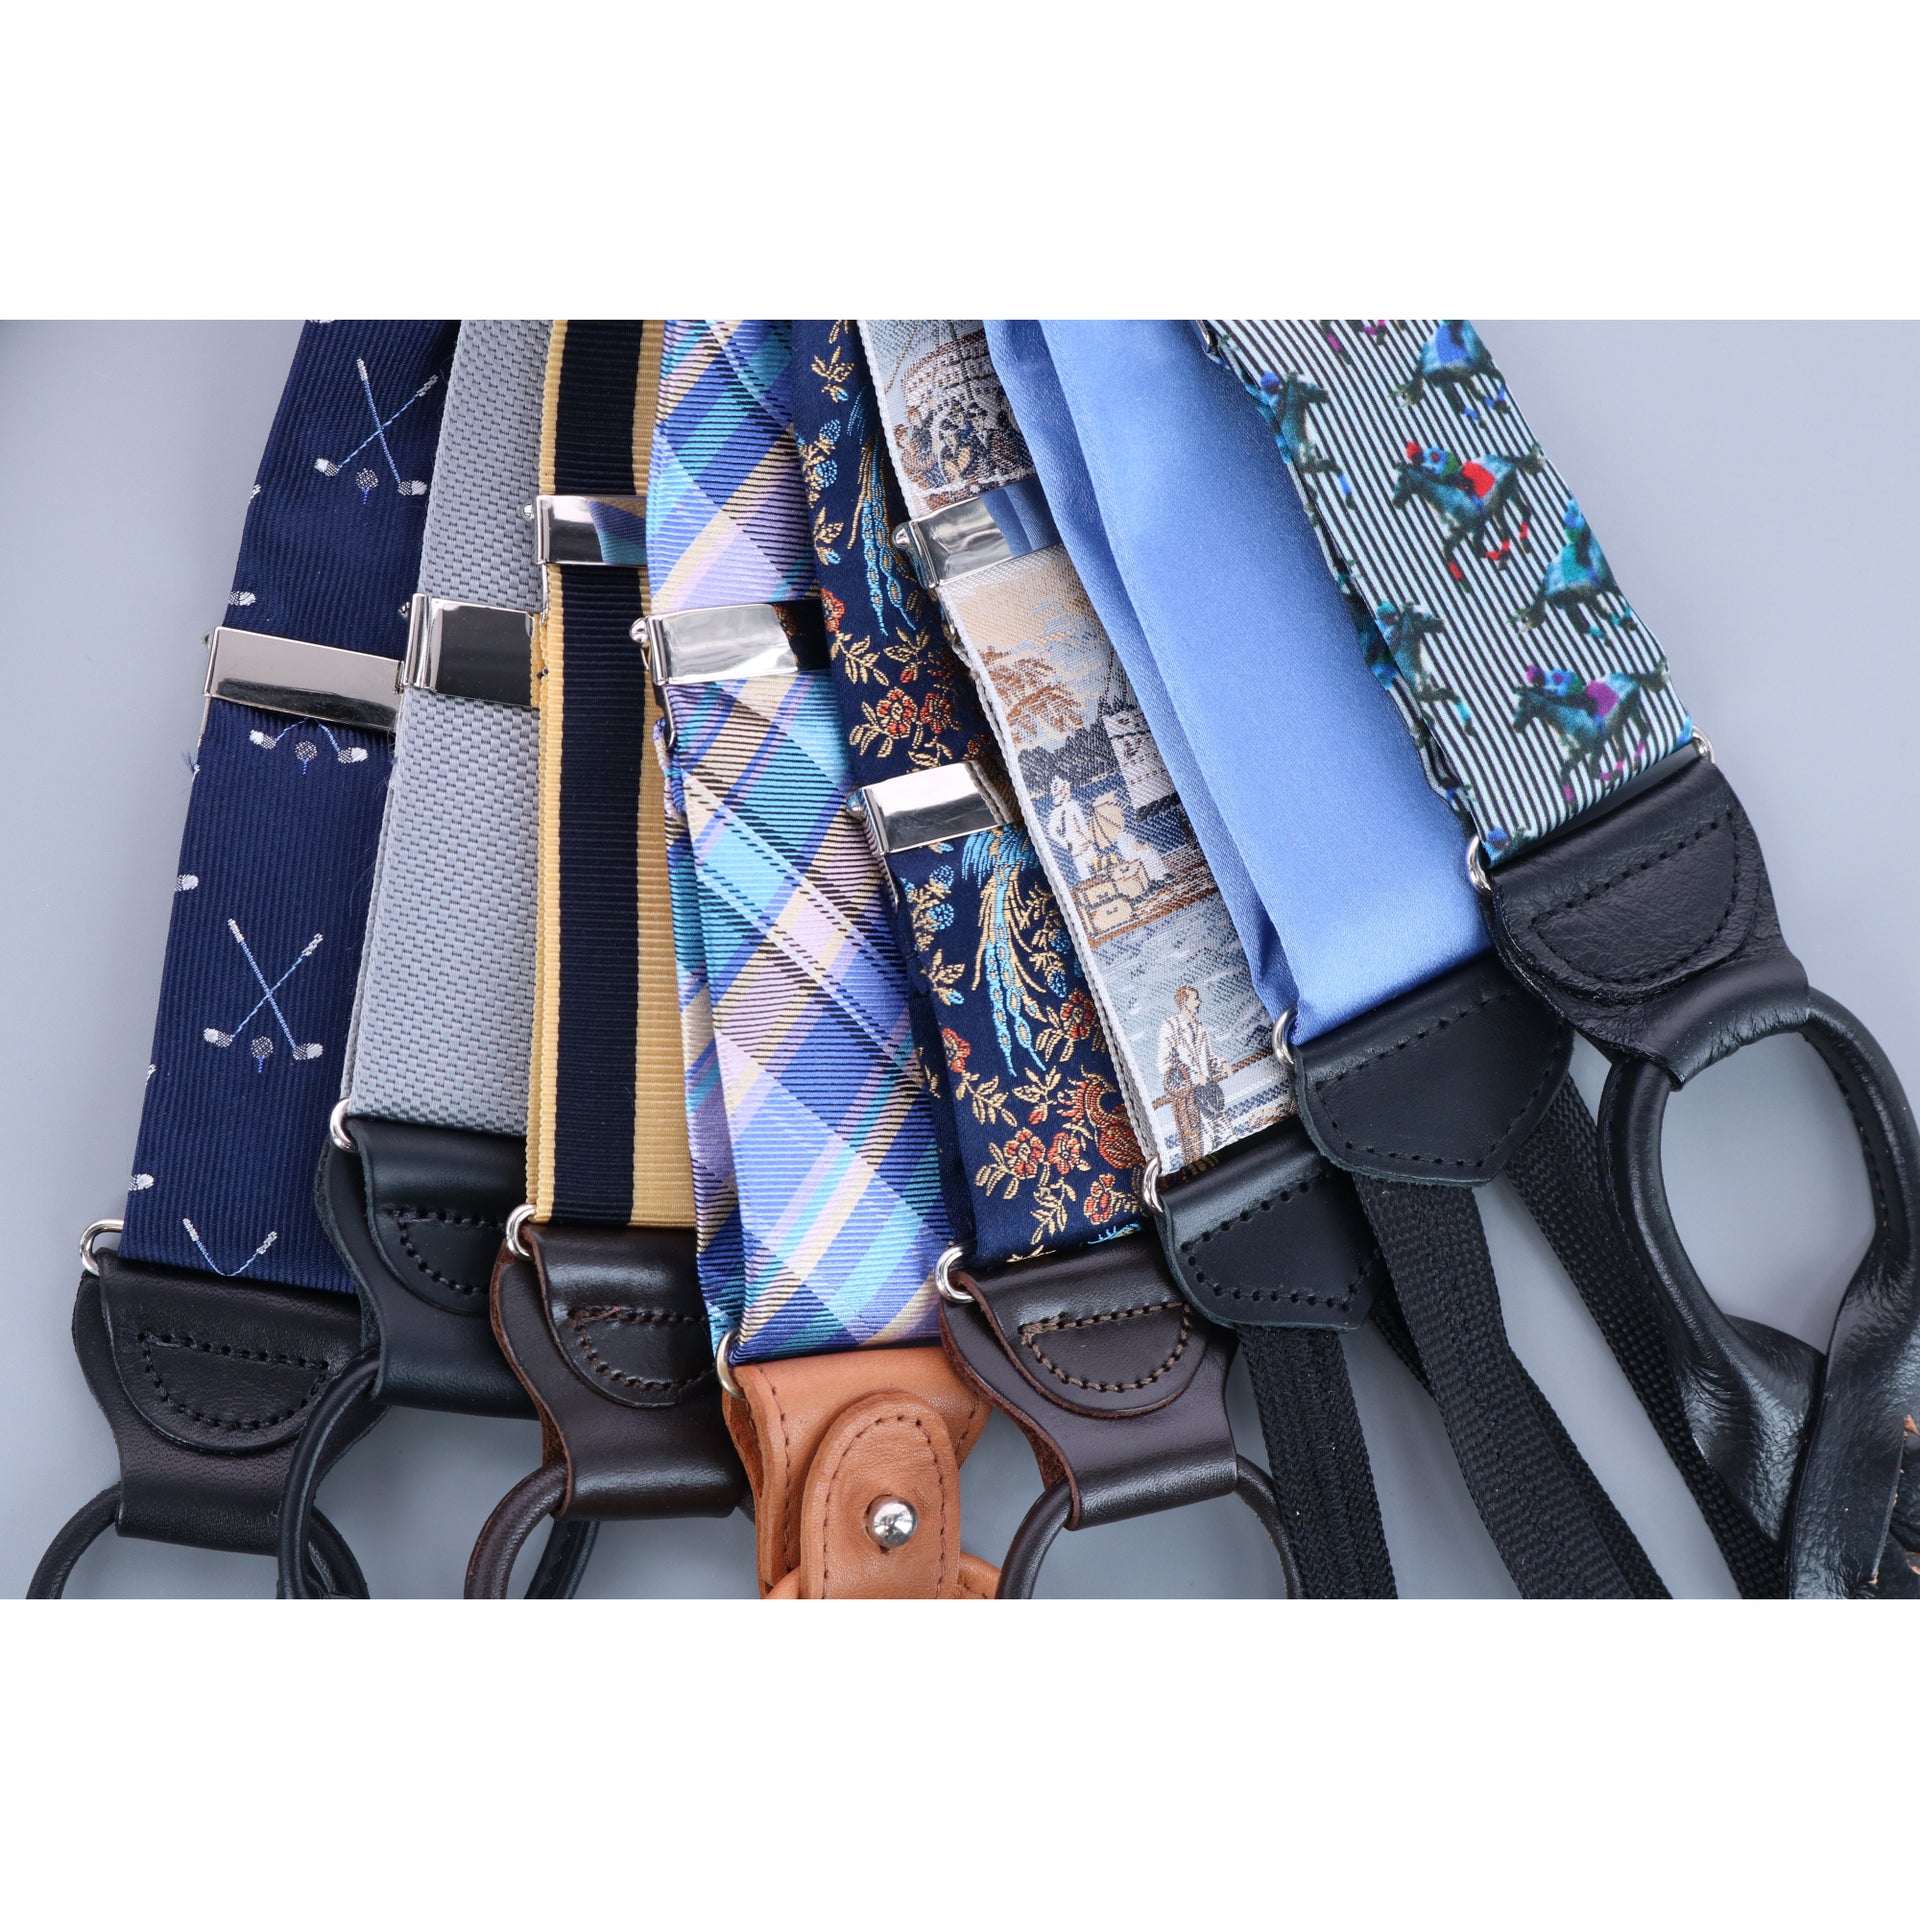 Suspender flat lay of multiple button end braces 